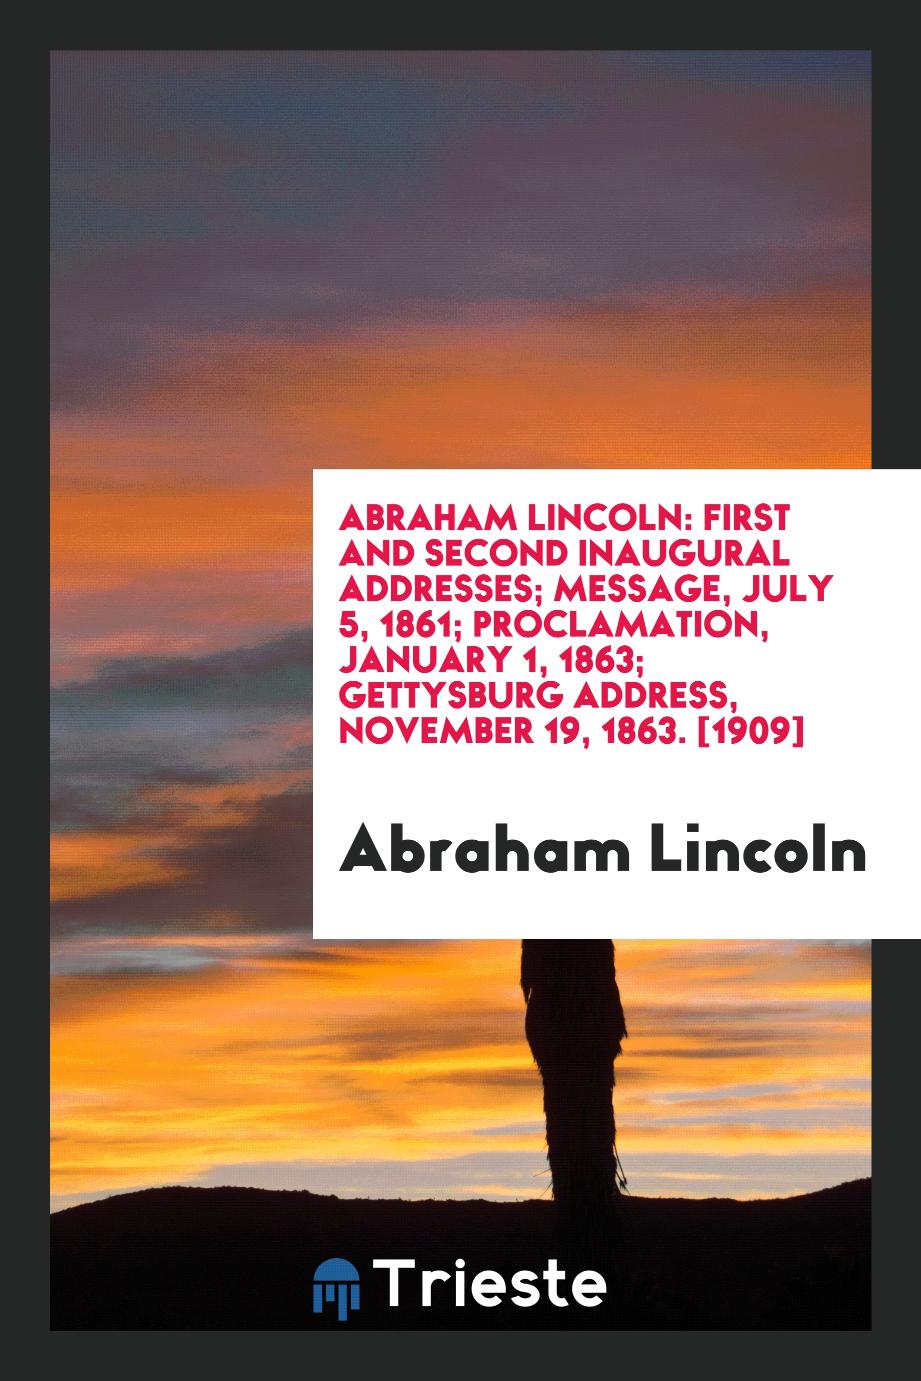 Abraham Lincoln: First and Second Inaugural Addresses; Message, July 5, 1861; Proclamation, January 1, 1863; Gettysburg Address, November 19, 1863. [1909]